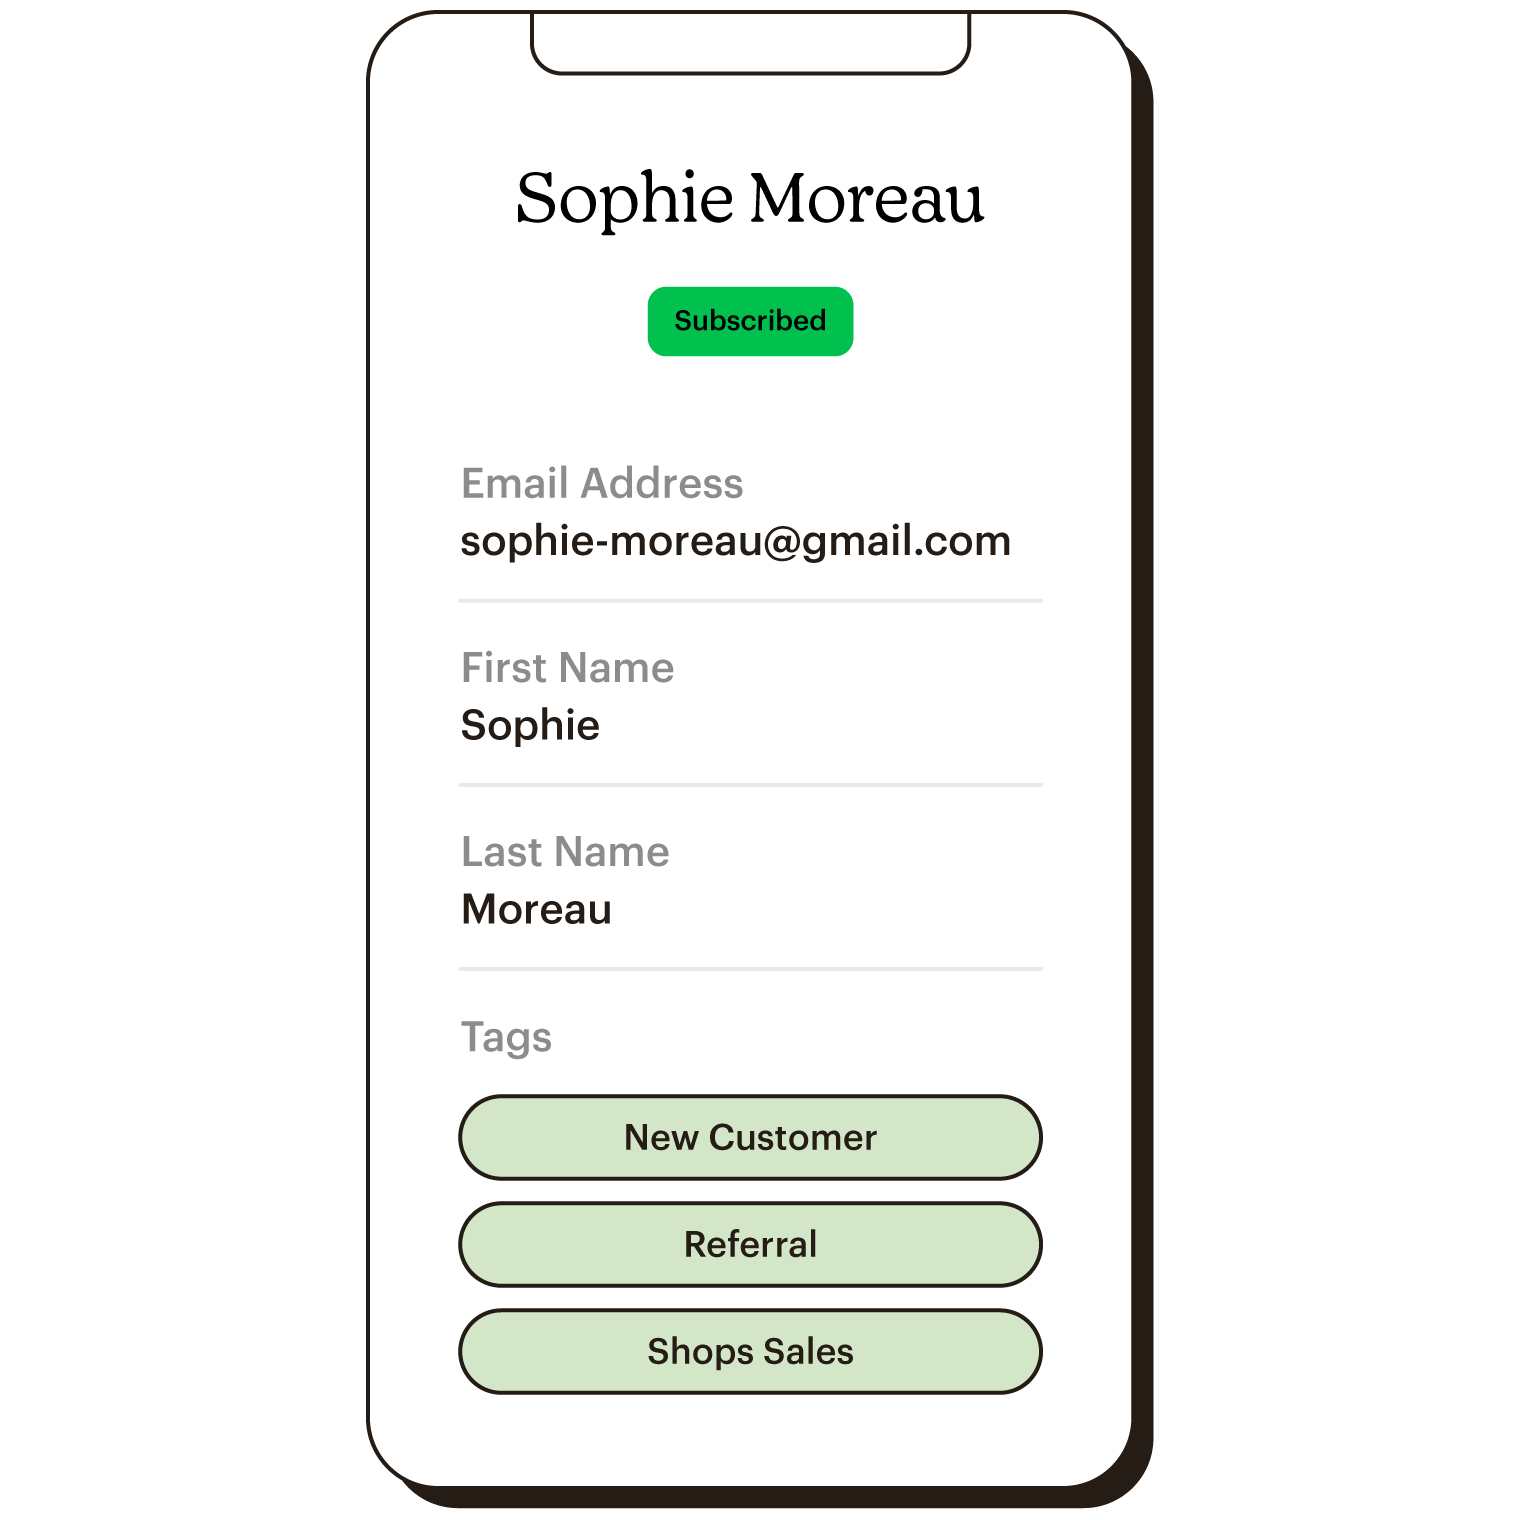 Mobile view of Sophie Moreau's profile with contact information and tags.